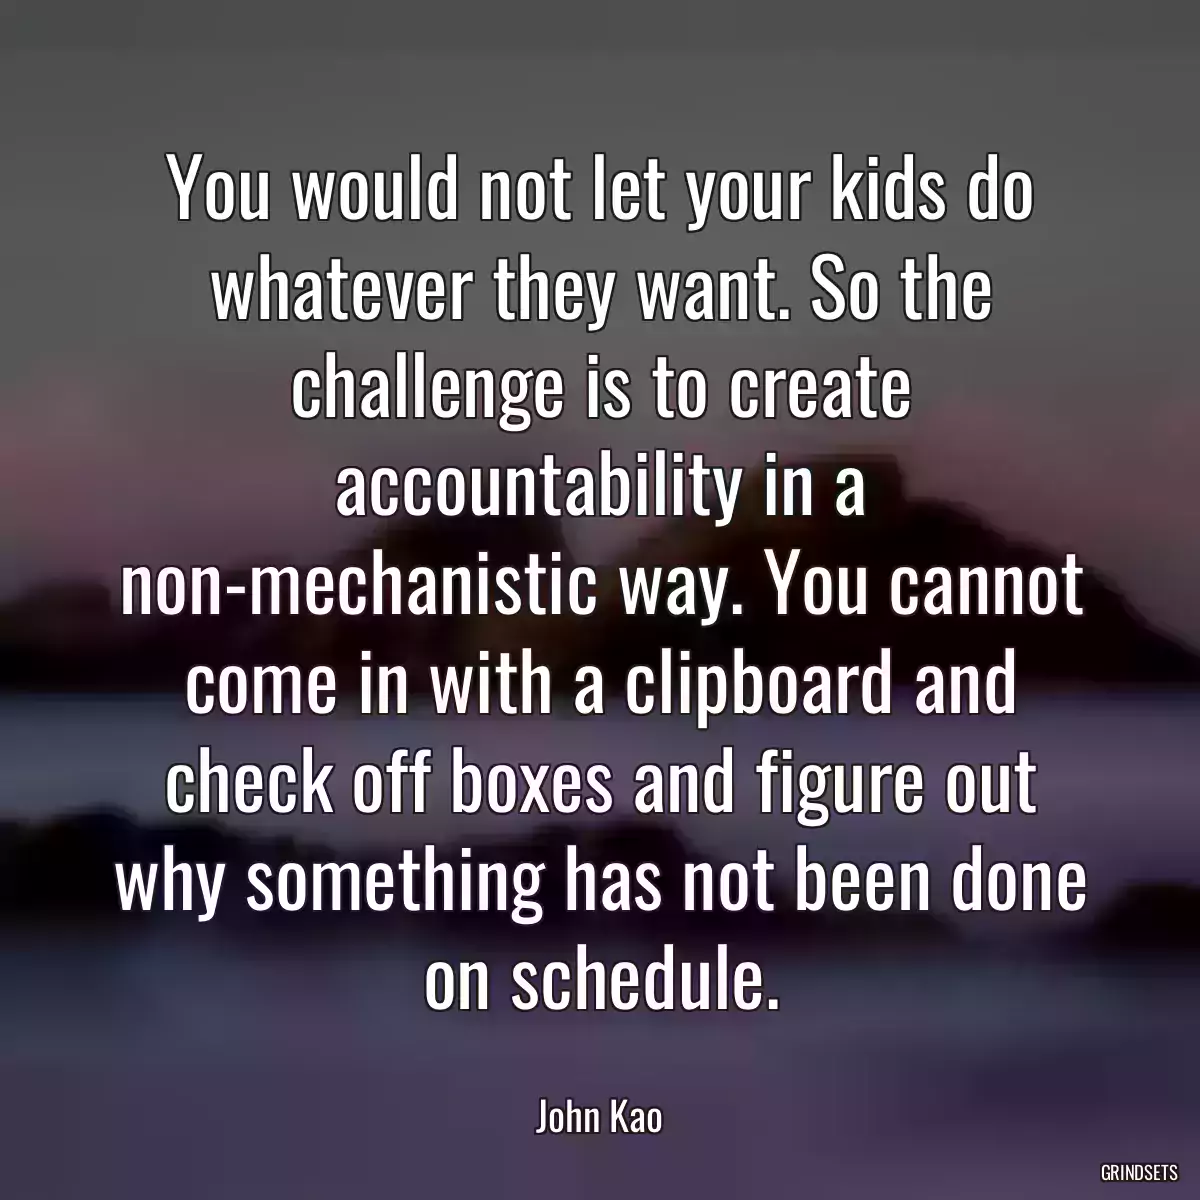 You would not let your kids do whatever they want. So the challenge is to create accountability in a non-mechanistic way. You cannot come in with a clipboard and check off boxes and figure out why something has not been done on schedule.